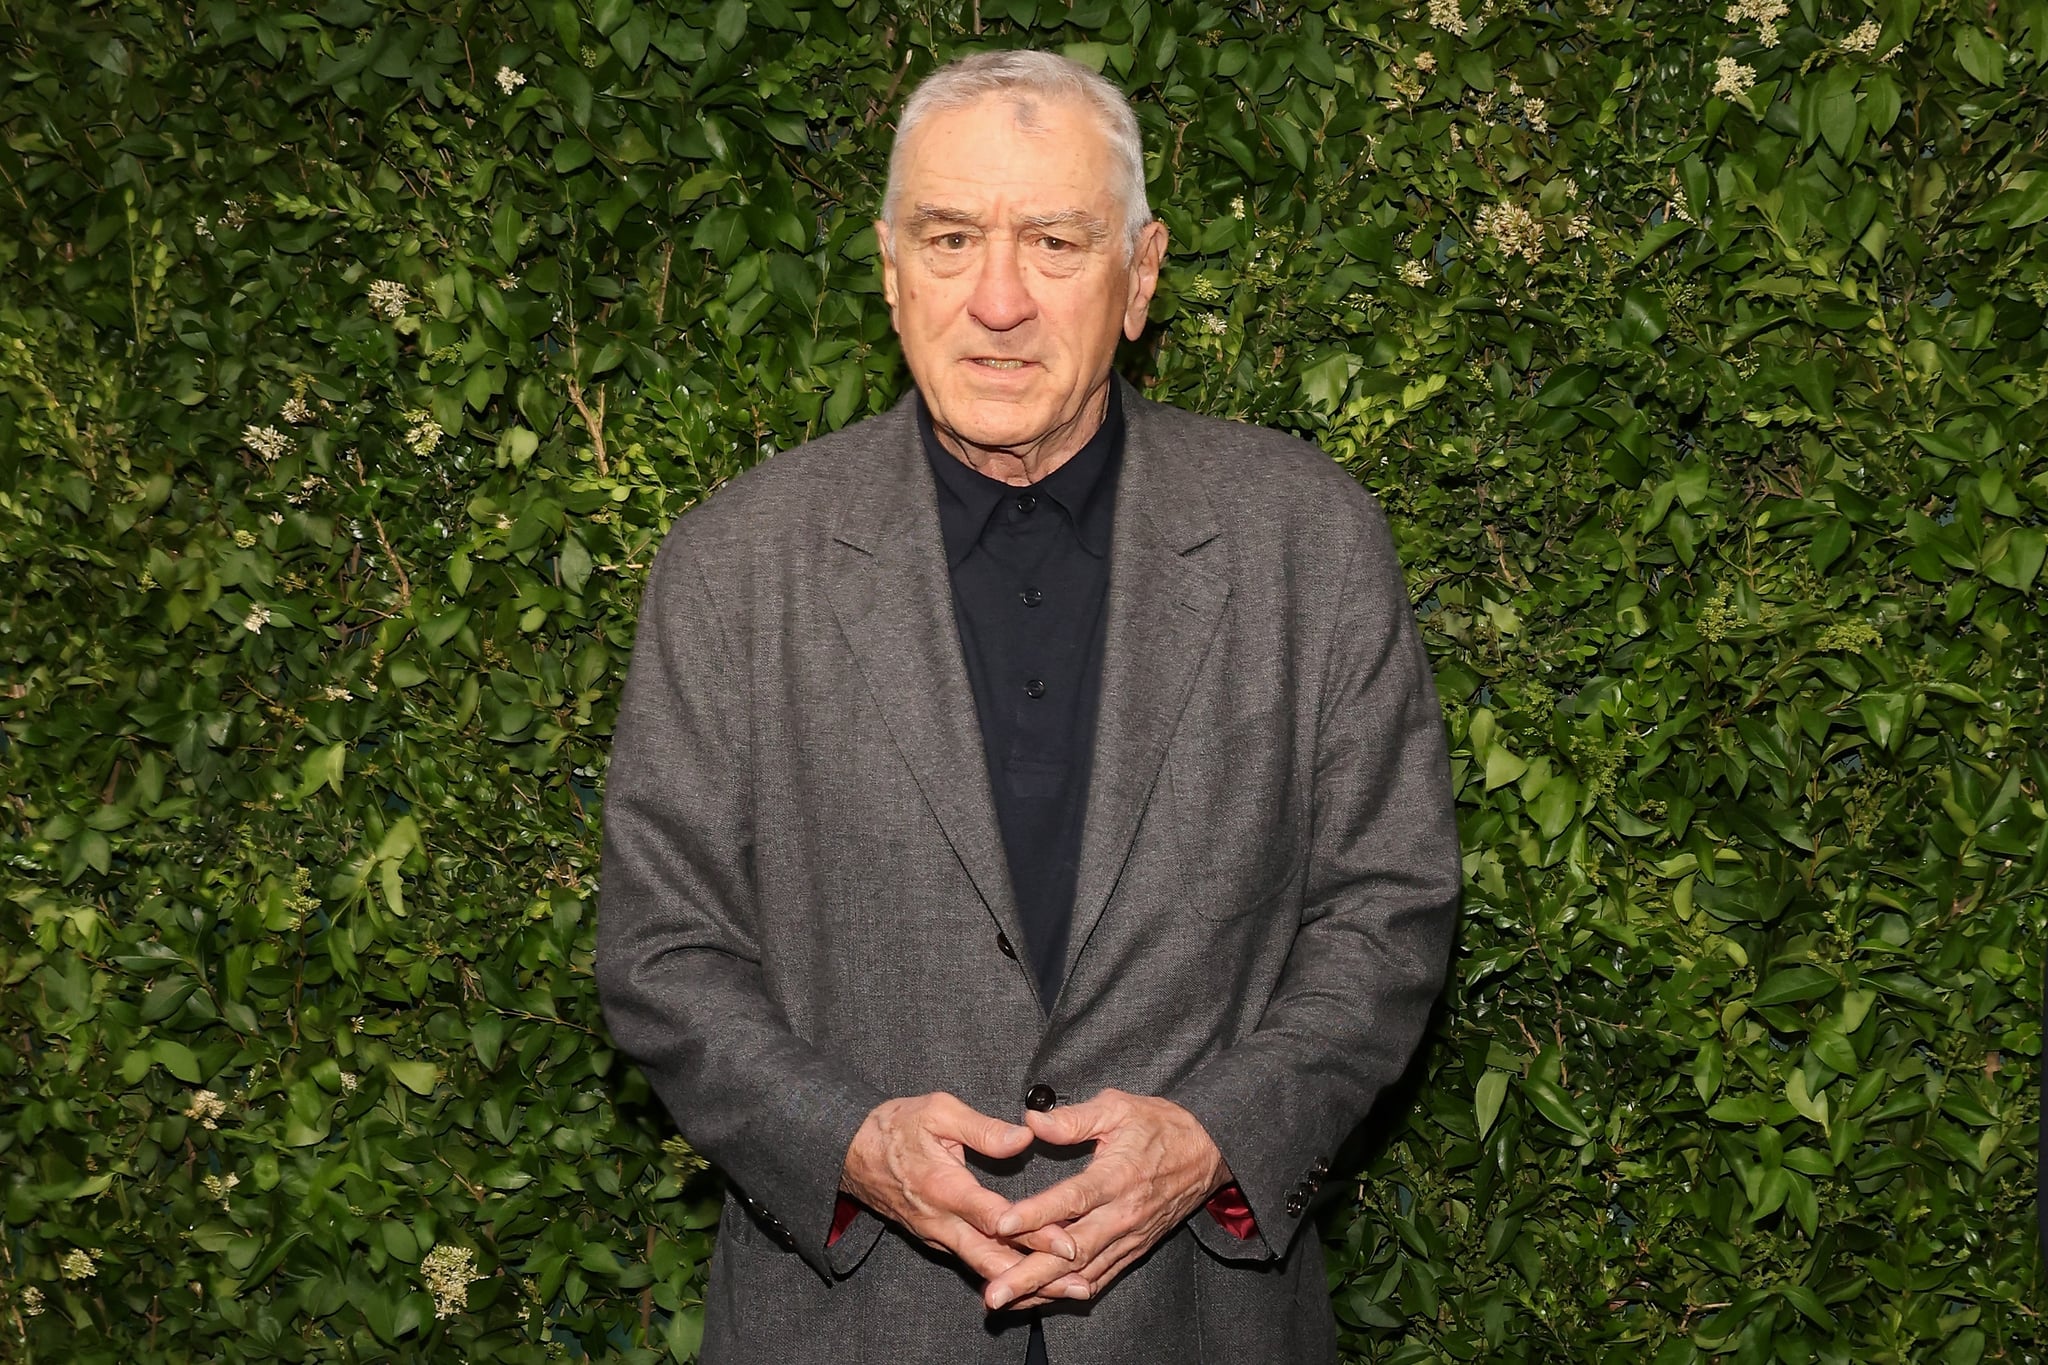 NEW YORK, NEW YORK - JUNE 13: Robert De Niro attends the 2022 Tribeca Film Festival Chanel Arts Dinner at Balthazar on June 13, 2022 in New York City. (Photo by Taylor Hill/Getty Images)